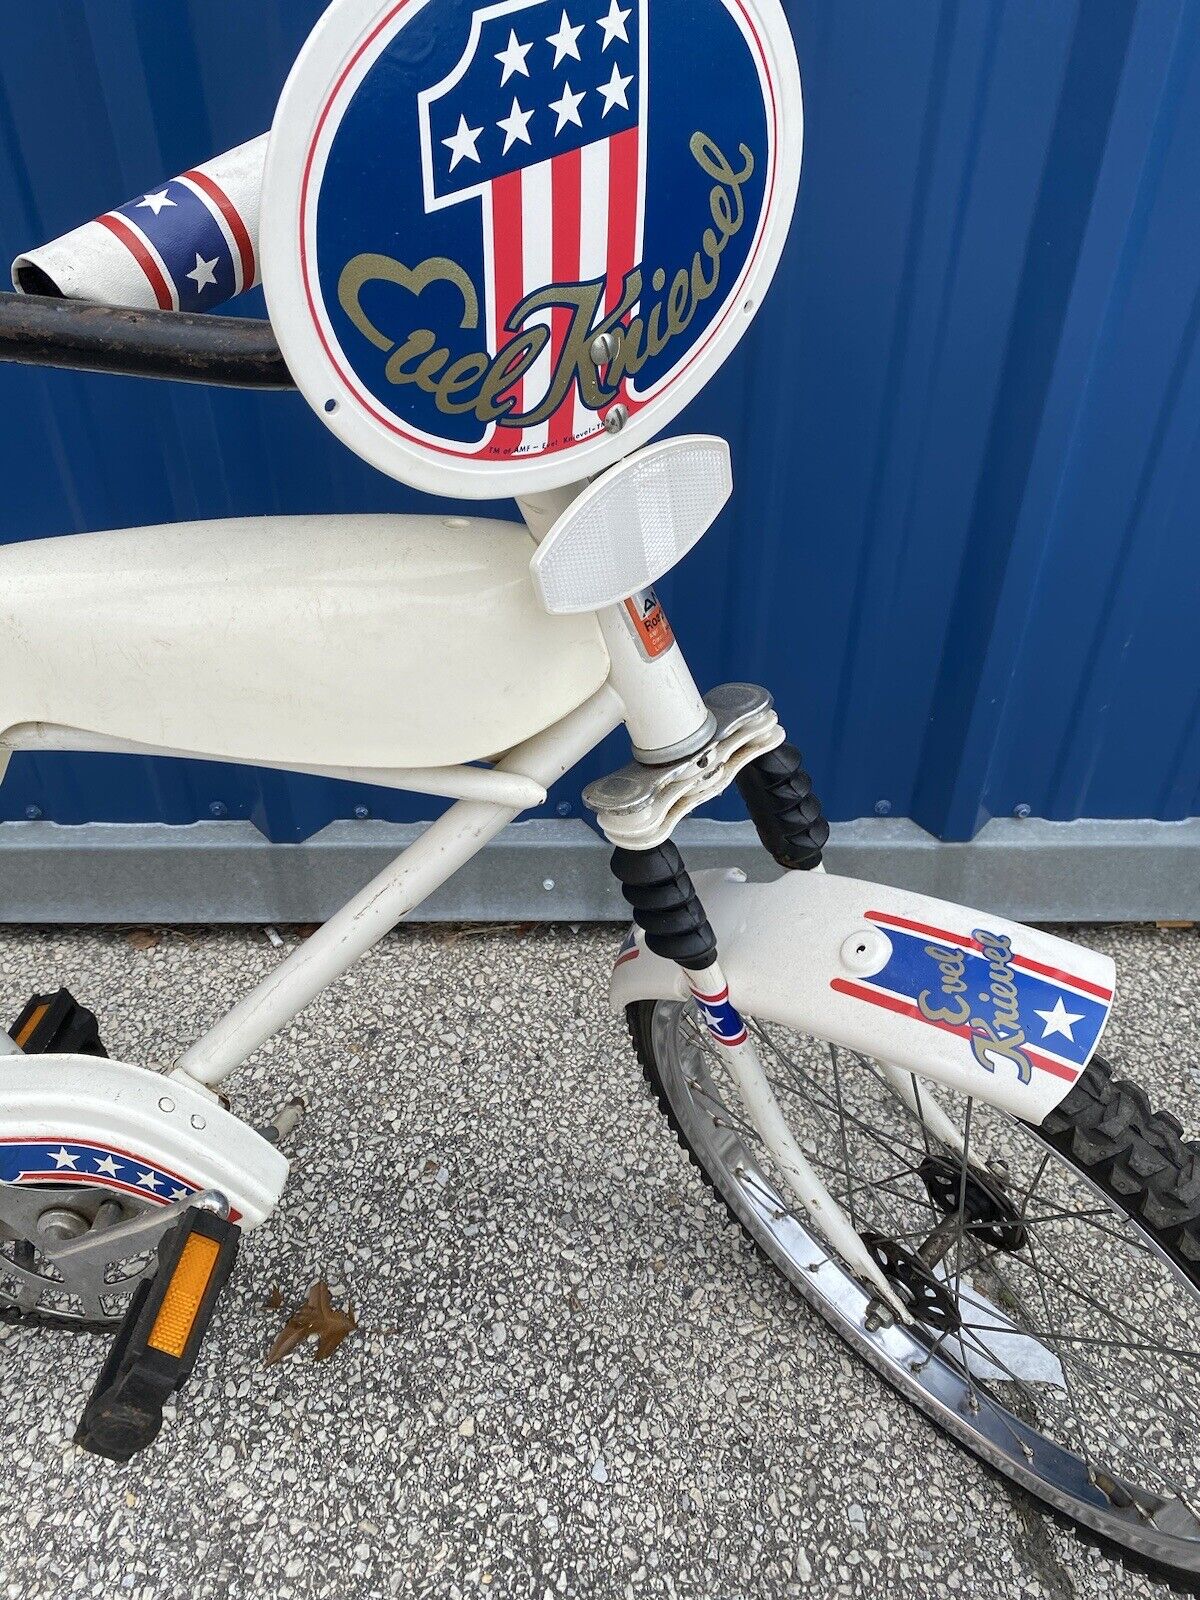 evel knievel amf bicycle